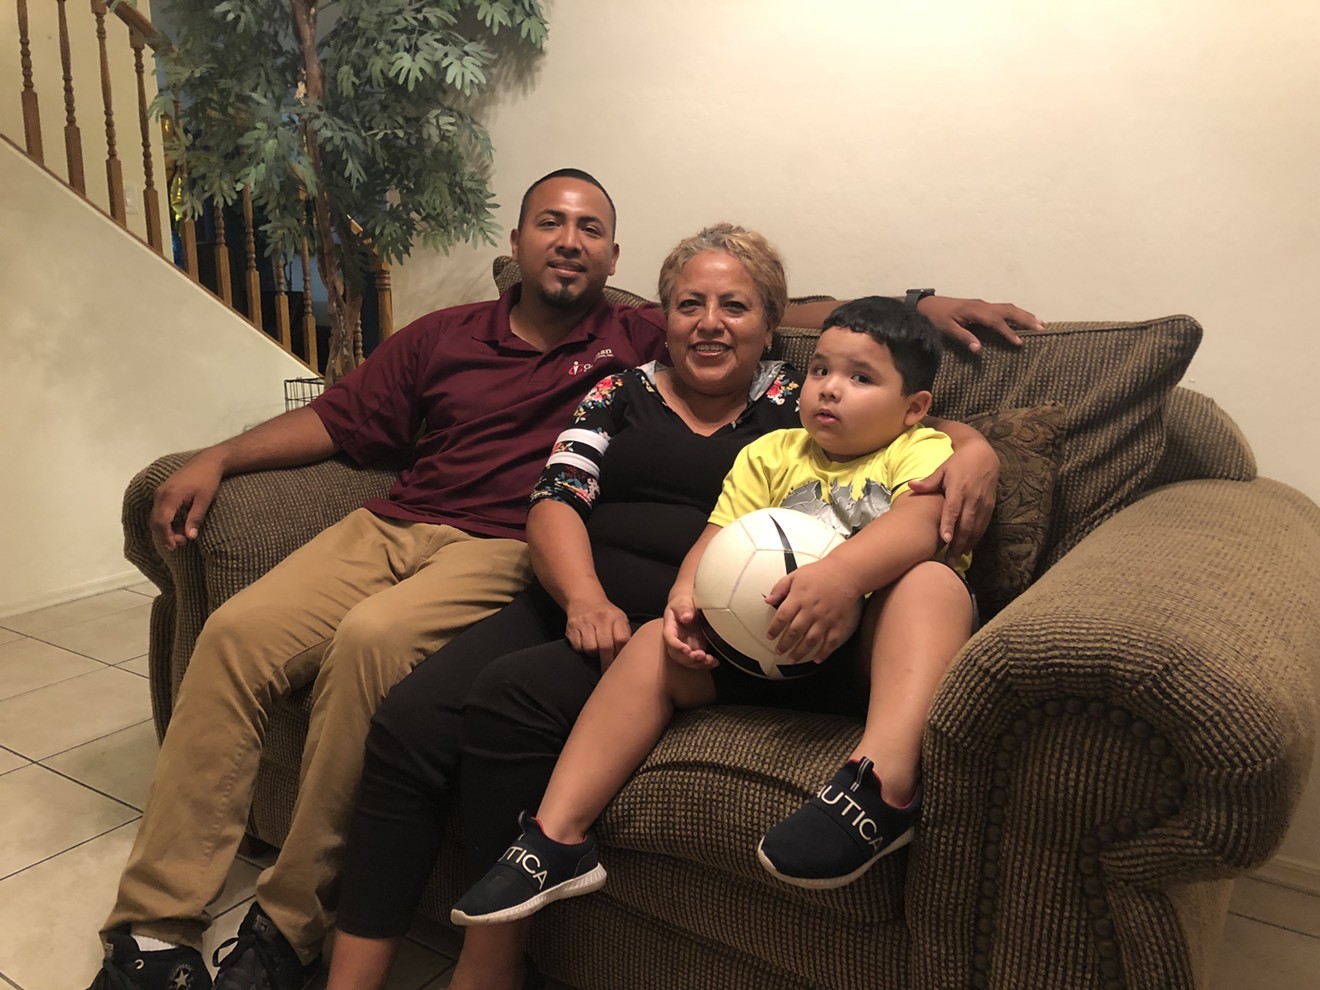 Jose Velazquez Pedrote, a 30-year-old DACA recipient, with his mother, Alba, and youngest son.